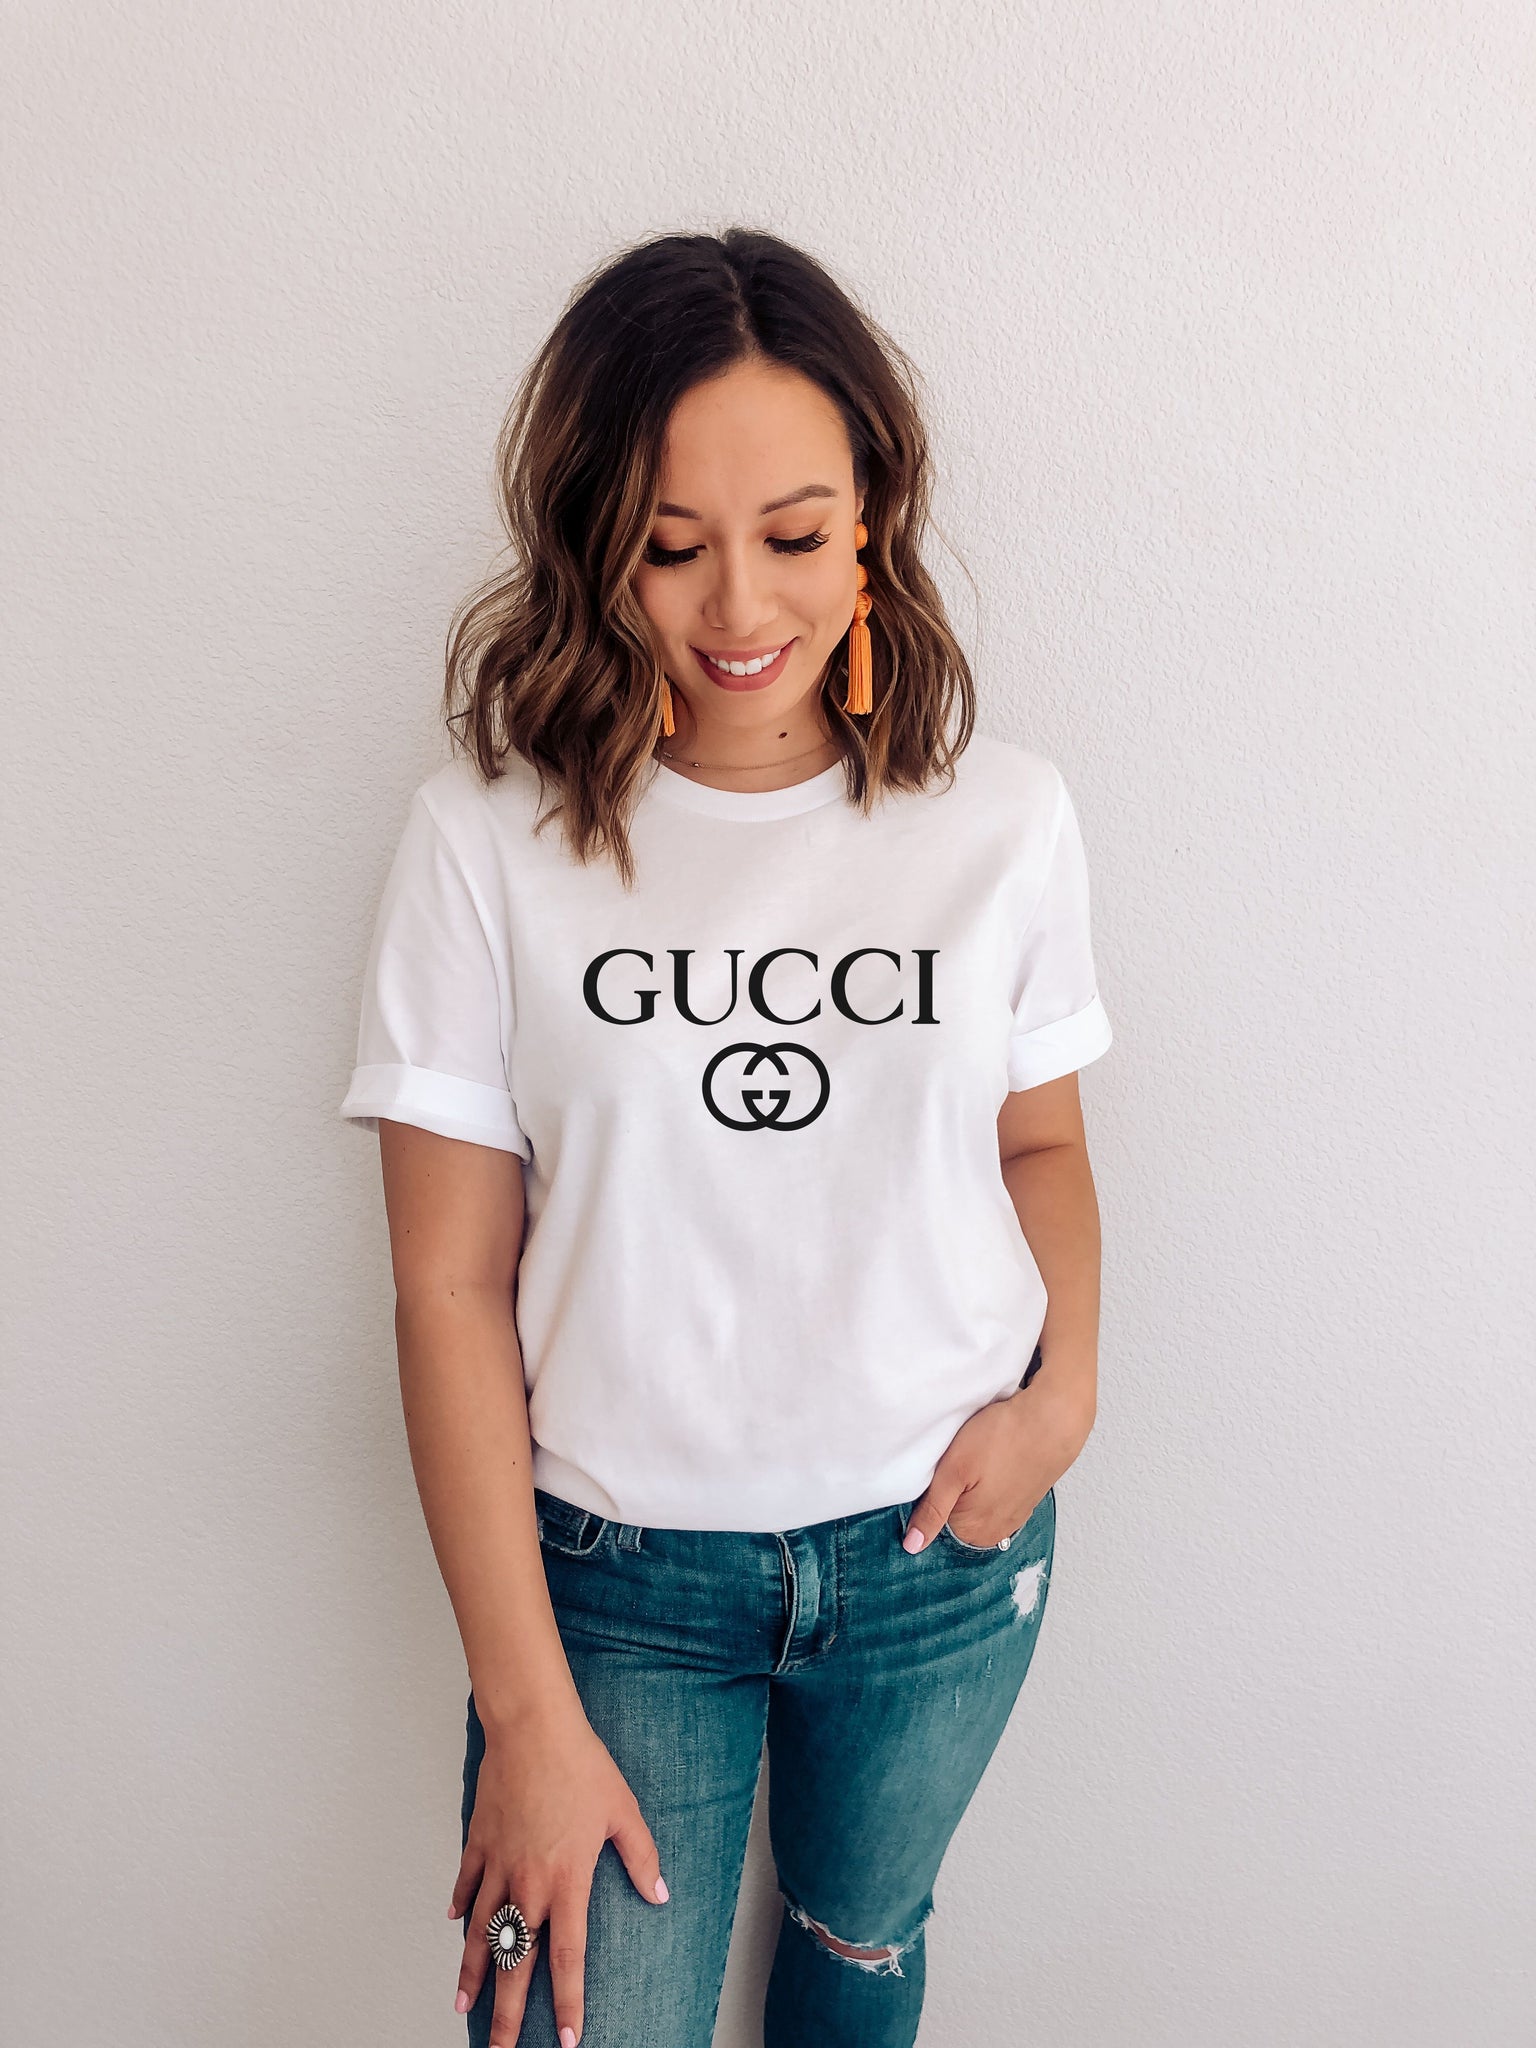 Gucci Designer Inspired Graphic Tee